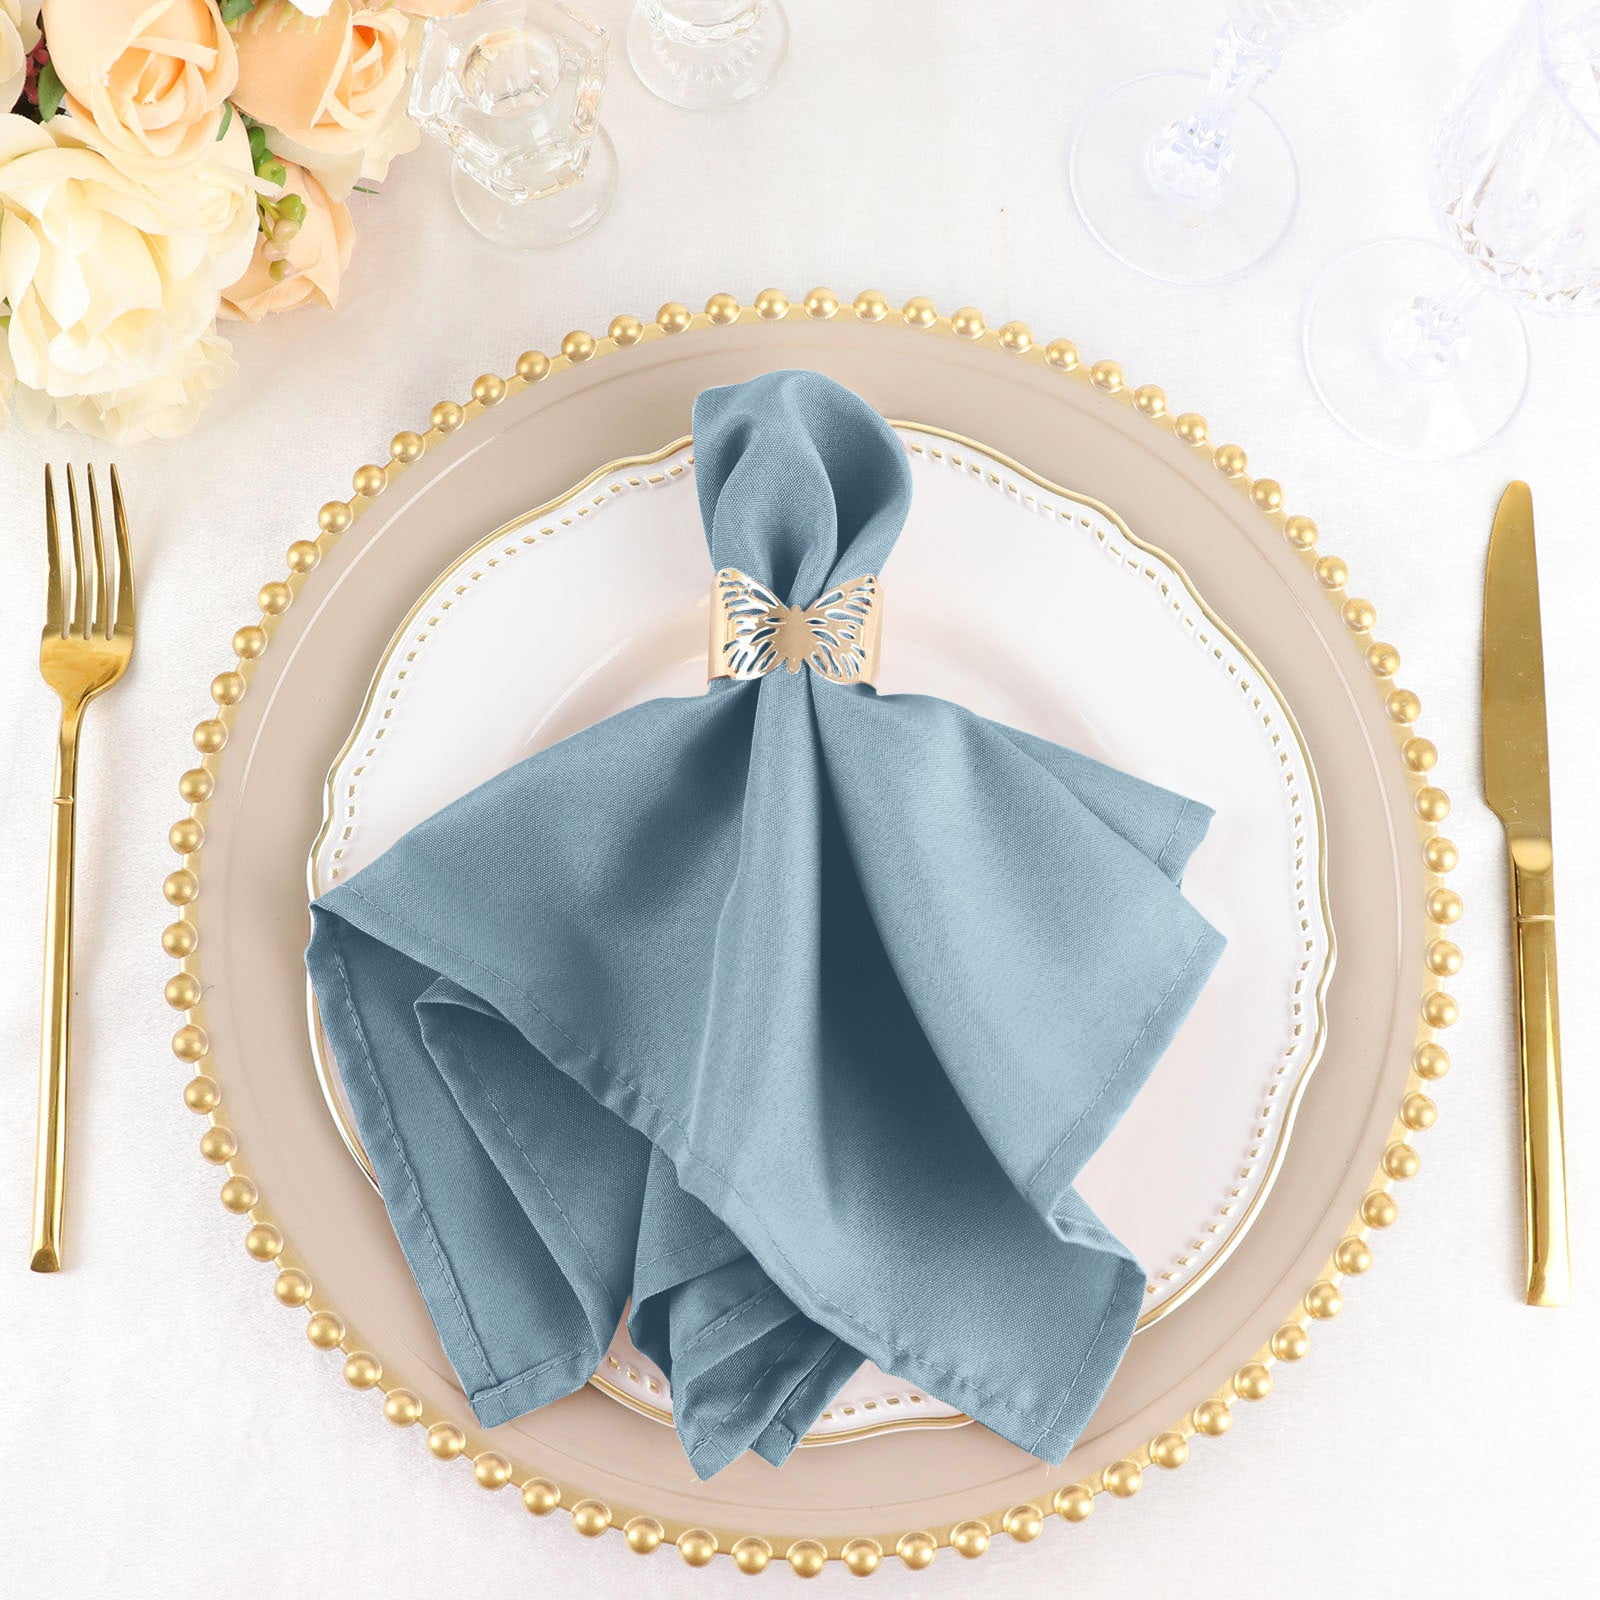 Mebakuk Cloth Napkins Set of 6, Premium 17 x 17 Inch Solid Washable Linen  Style Napkins, Soft Table Napkin for Wedding Party Restaurant Dinner  Parties